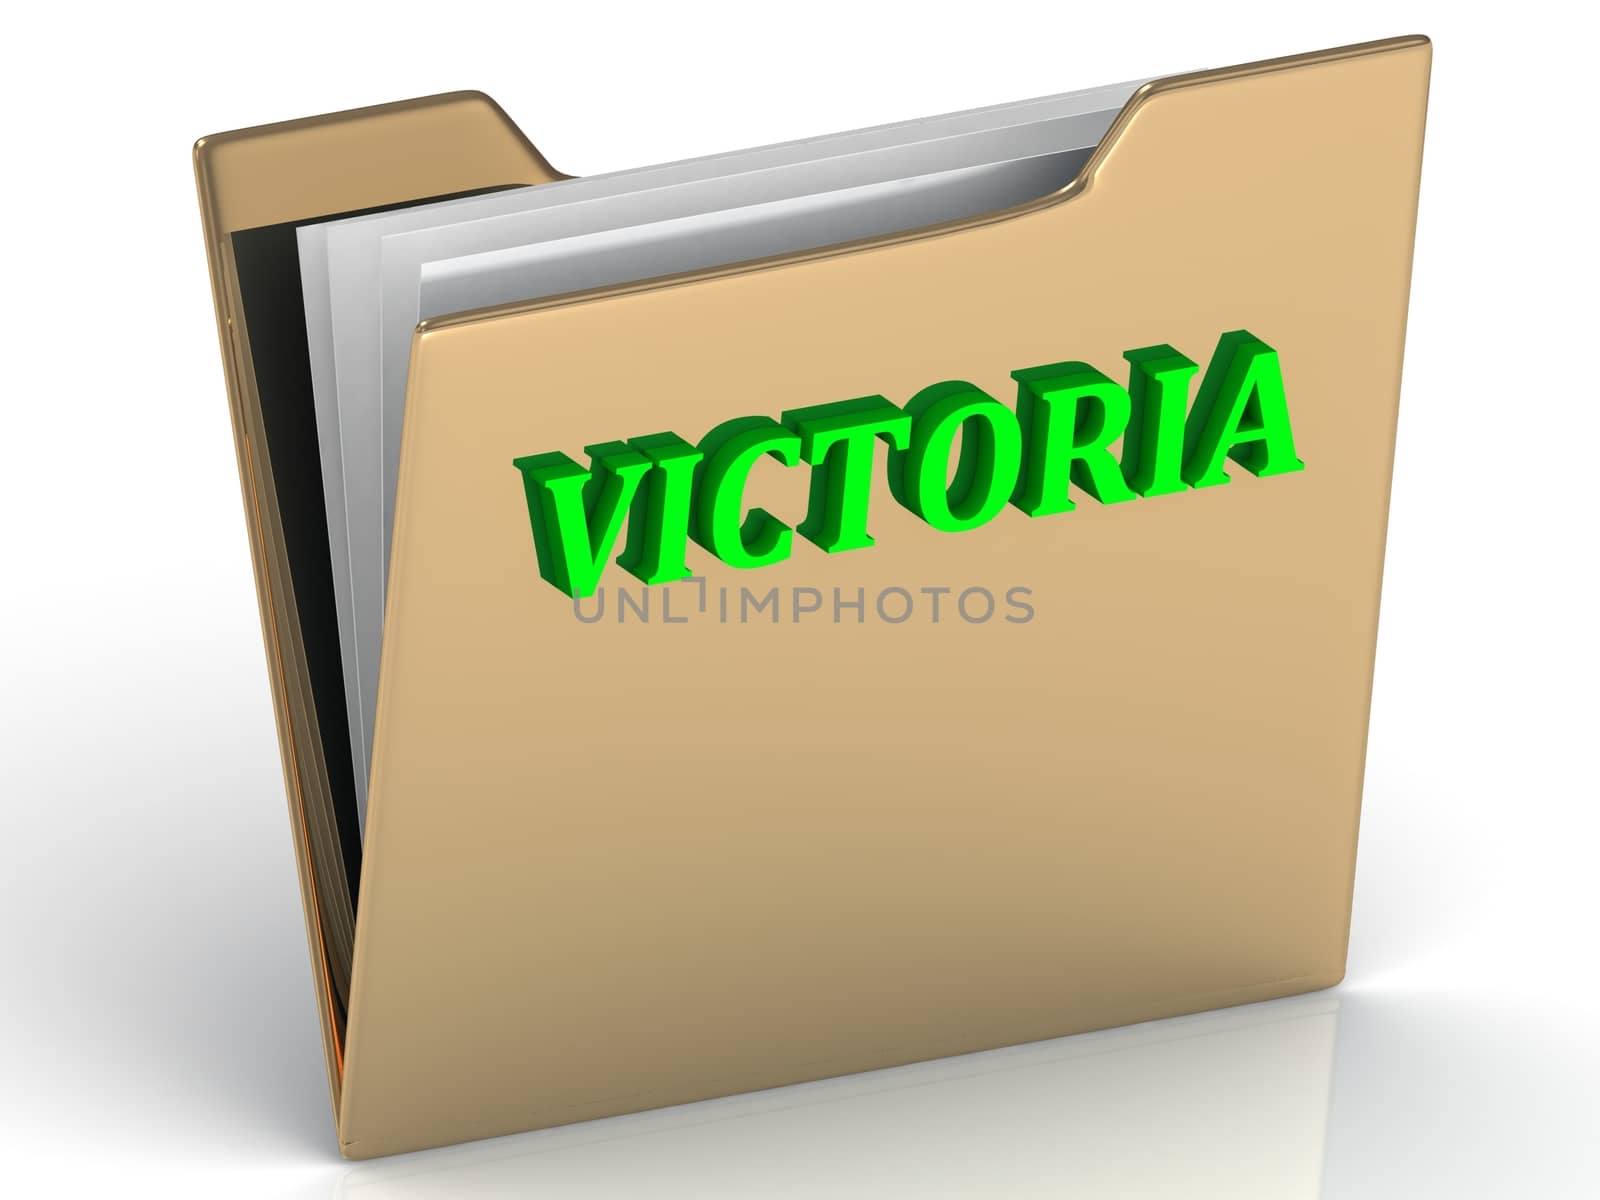 VICTORIA- bright letters on a gold folder on by GreenMost